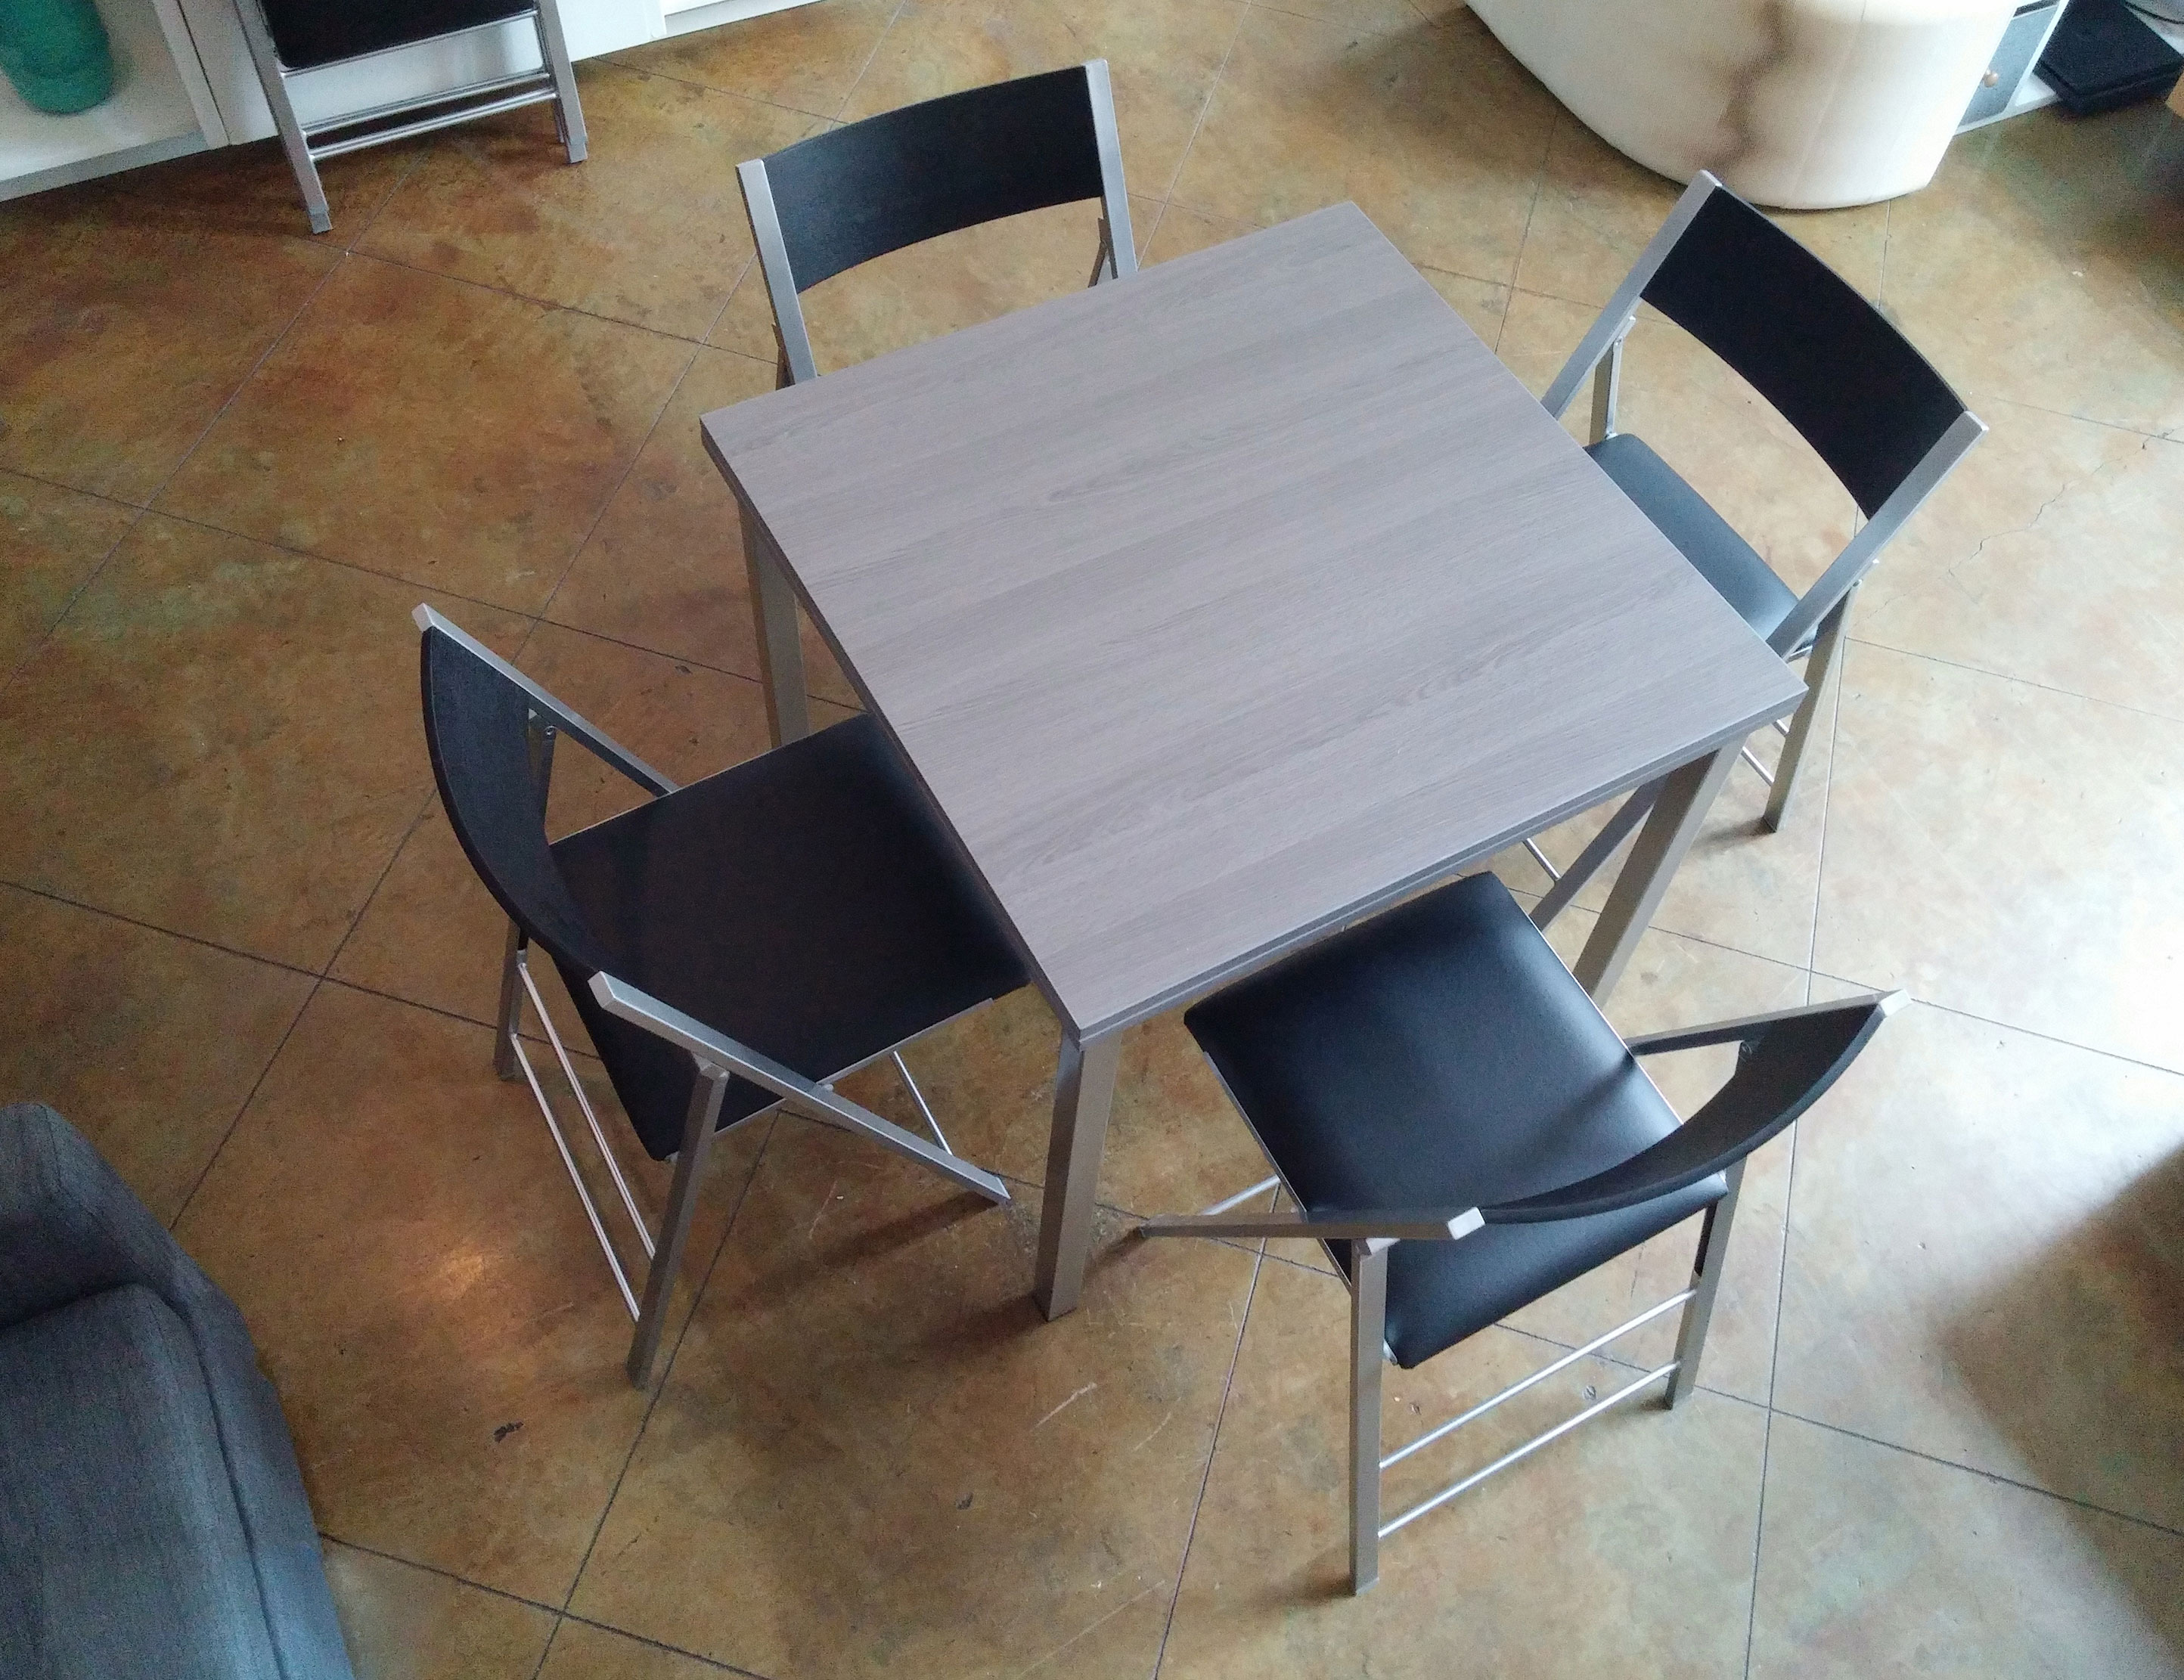 Converting Echo Square Table With 4 Black Folding Chairs 1 